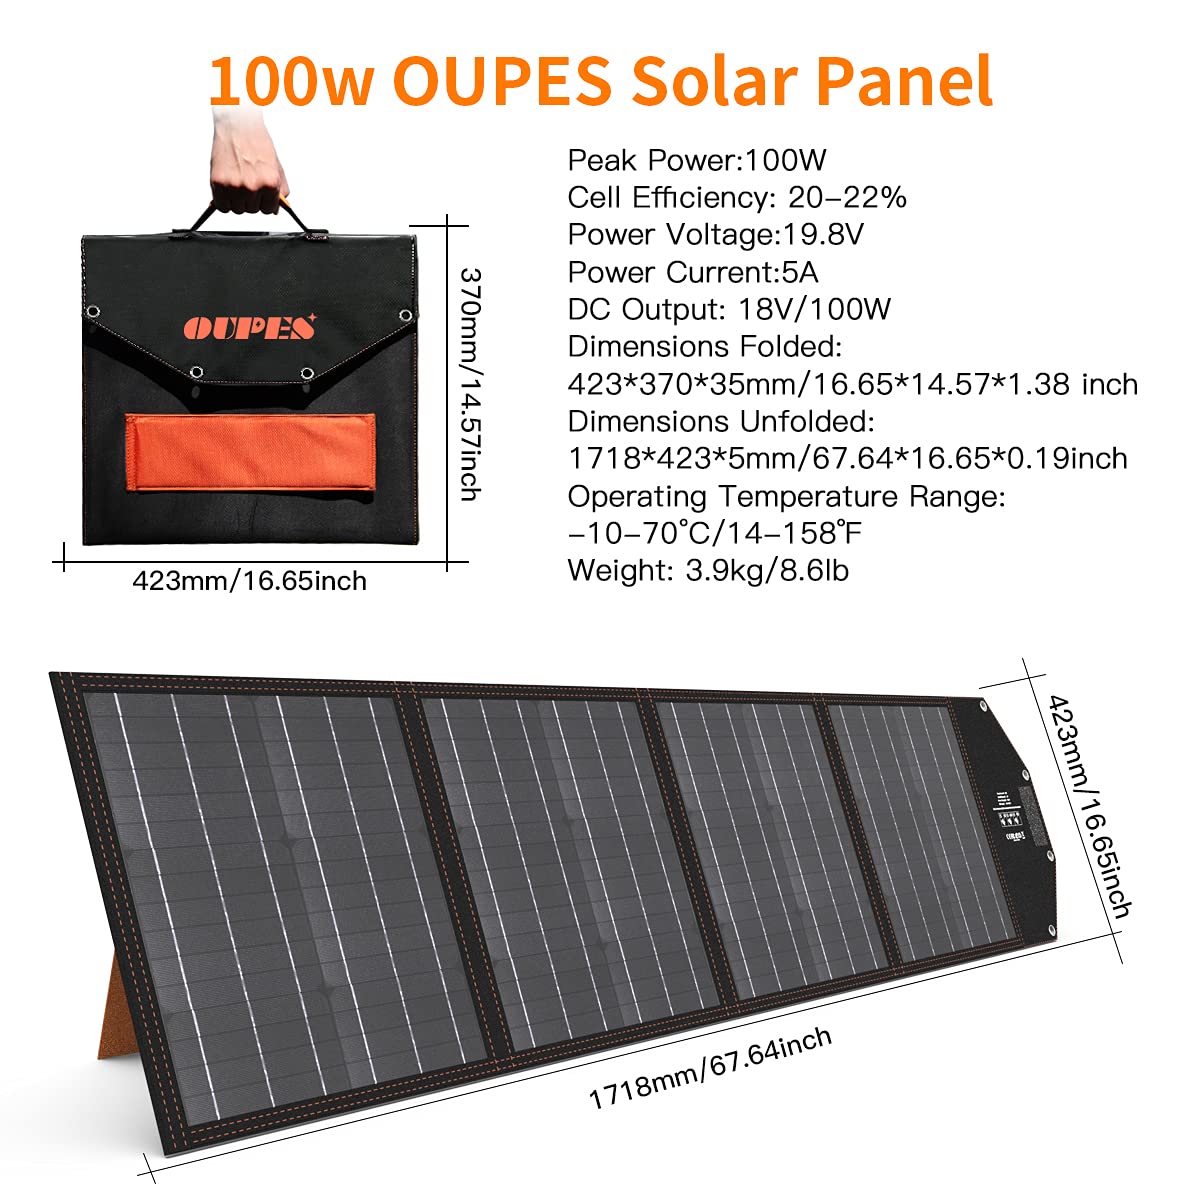 OUPES 600W Portable Power Station, Solar Generator with 100W Solar Panel, 595Wh(186000mAh) LiFePO4 Power Station for Outdoors Home Use RV Camping